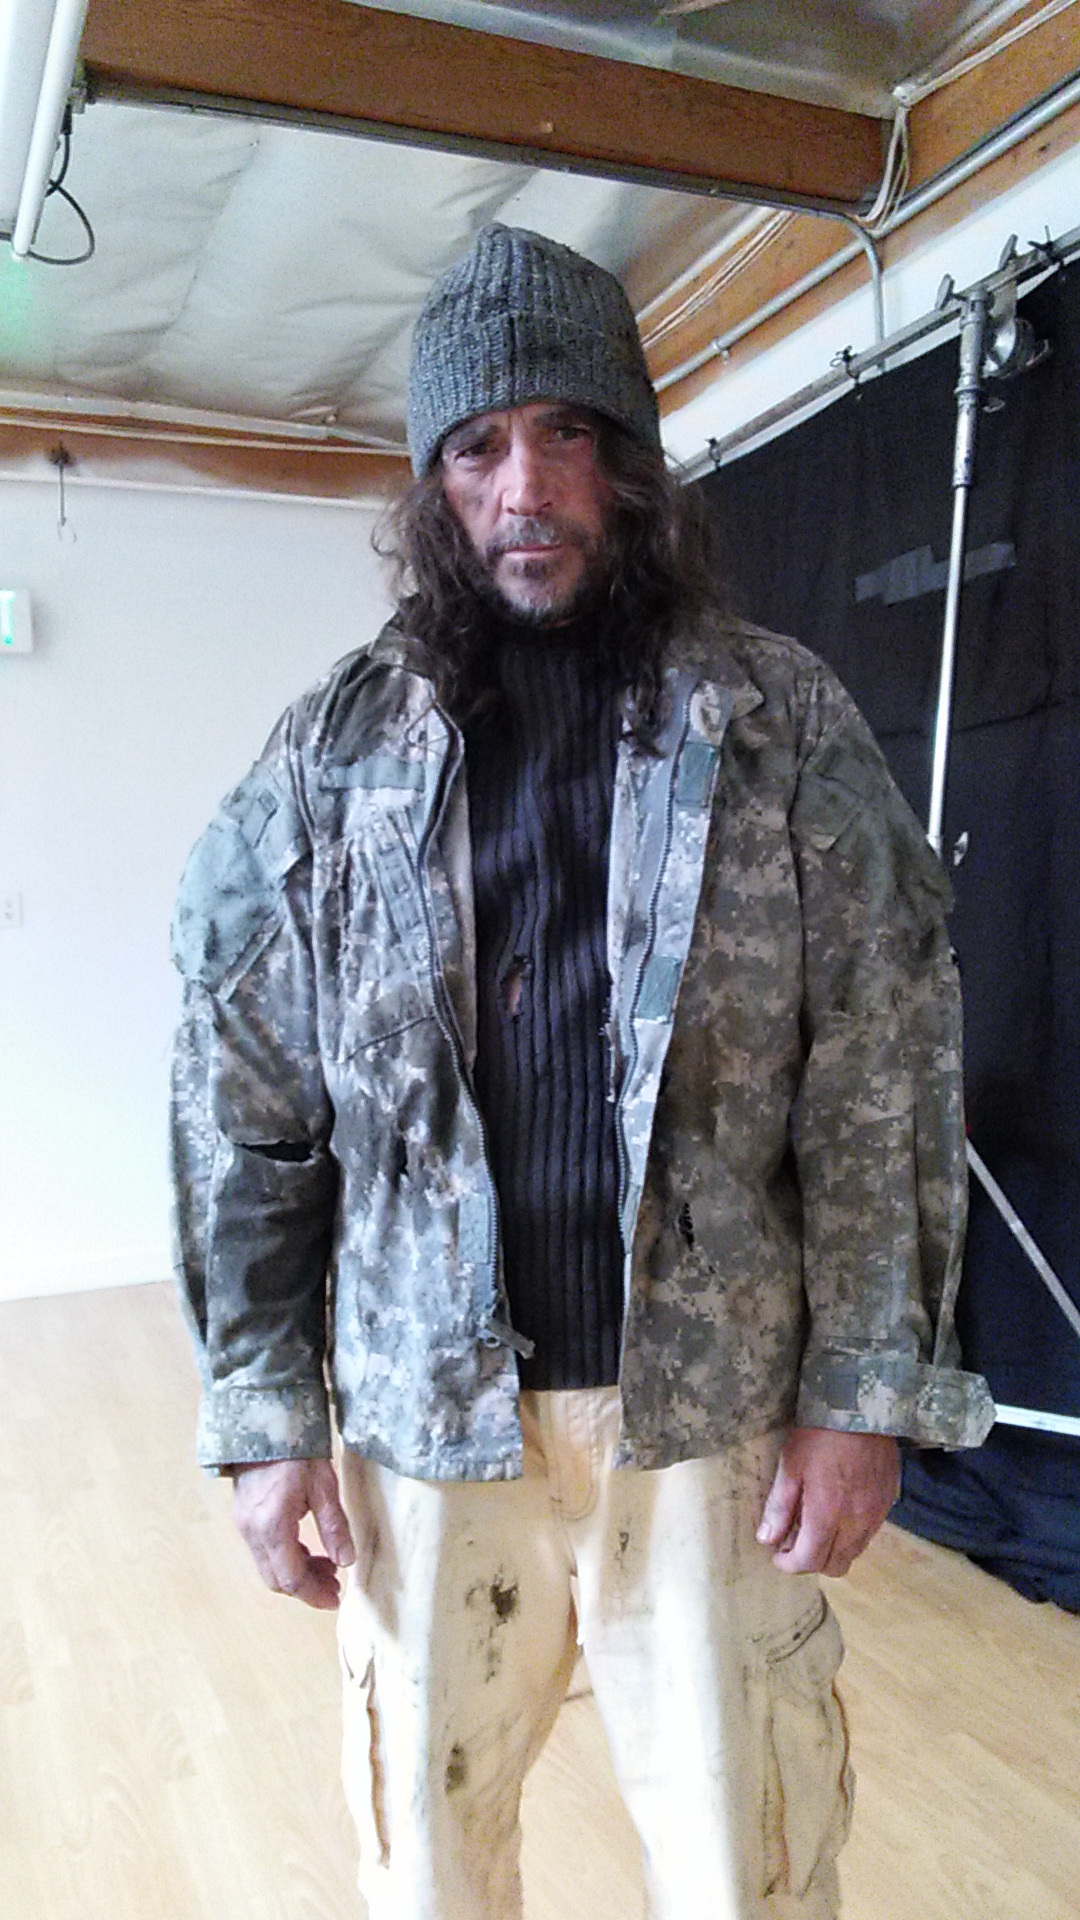 Homeless veteran from EXTRA SPECIAL MASSAGE, March 2015.